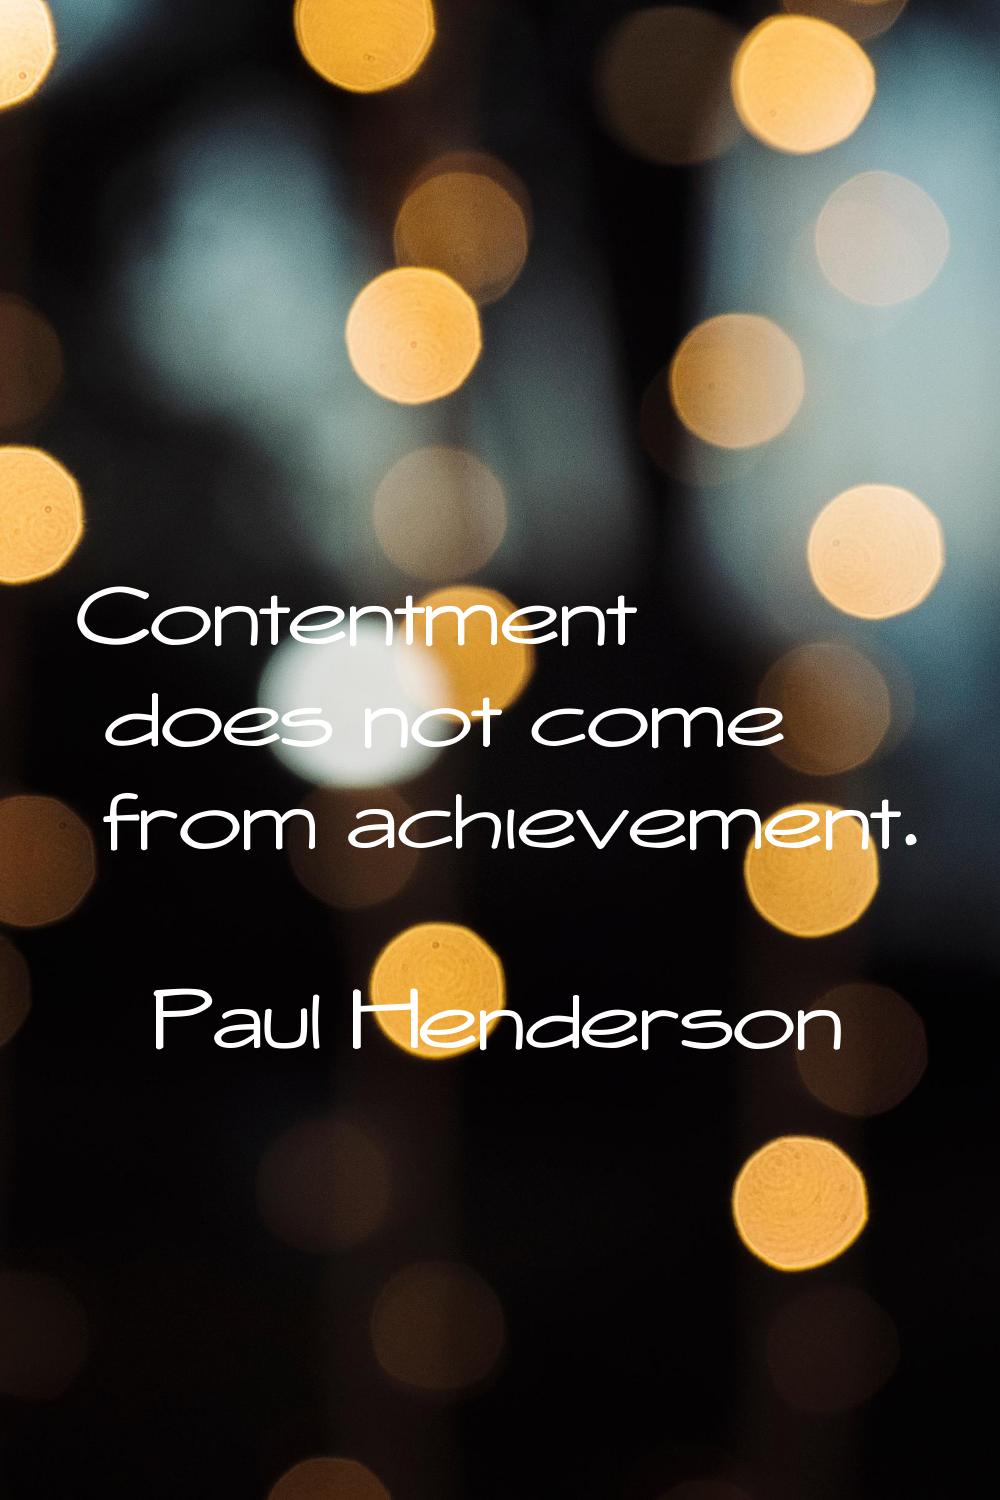 Contentment does not come from achievement.